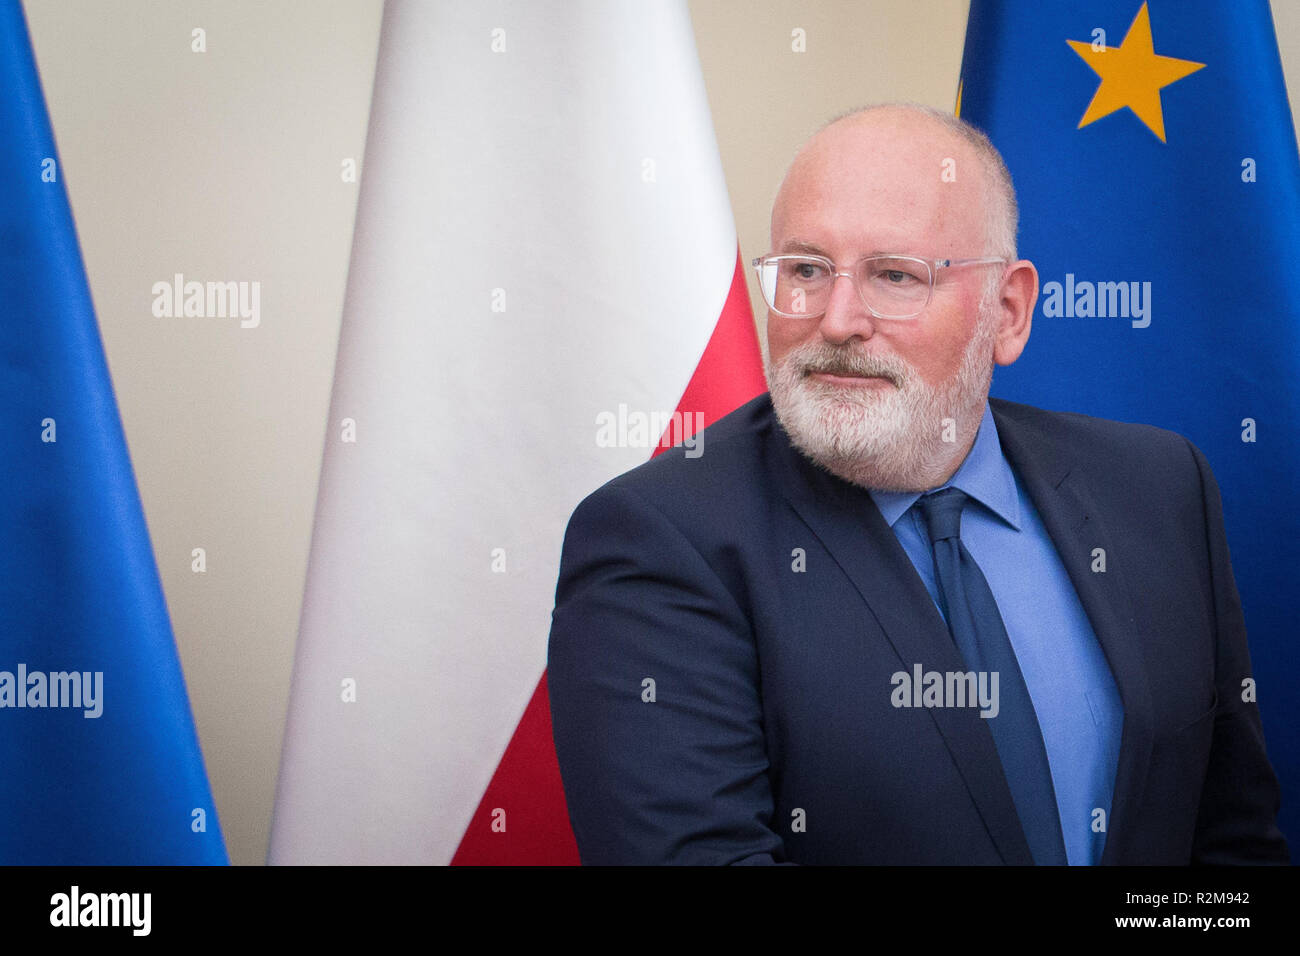 First Vice-President of European Commission Frans Timmermans during a meeting with Polish Prime Minister Mateusz Morawiecki at Chancellery of the Prime Minister in Warsaw, Poland on 18 June 2018 Stock Photo